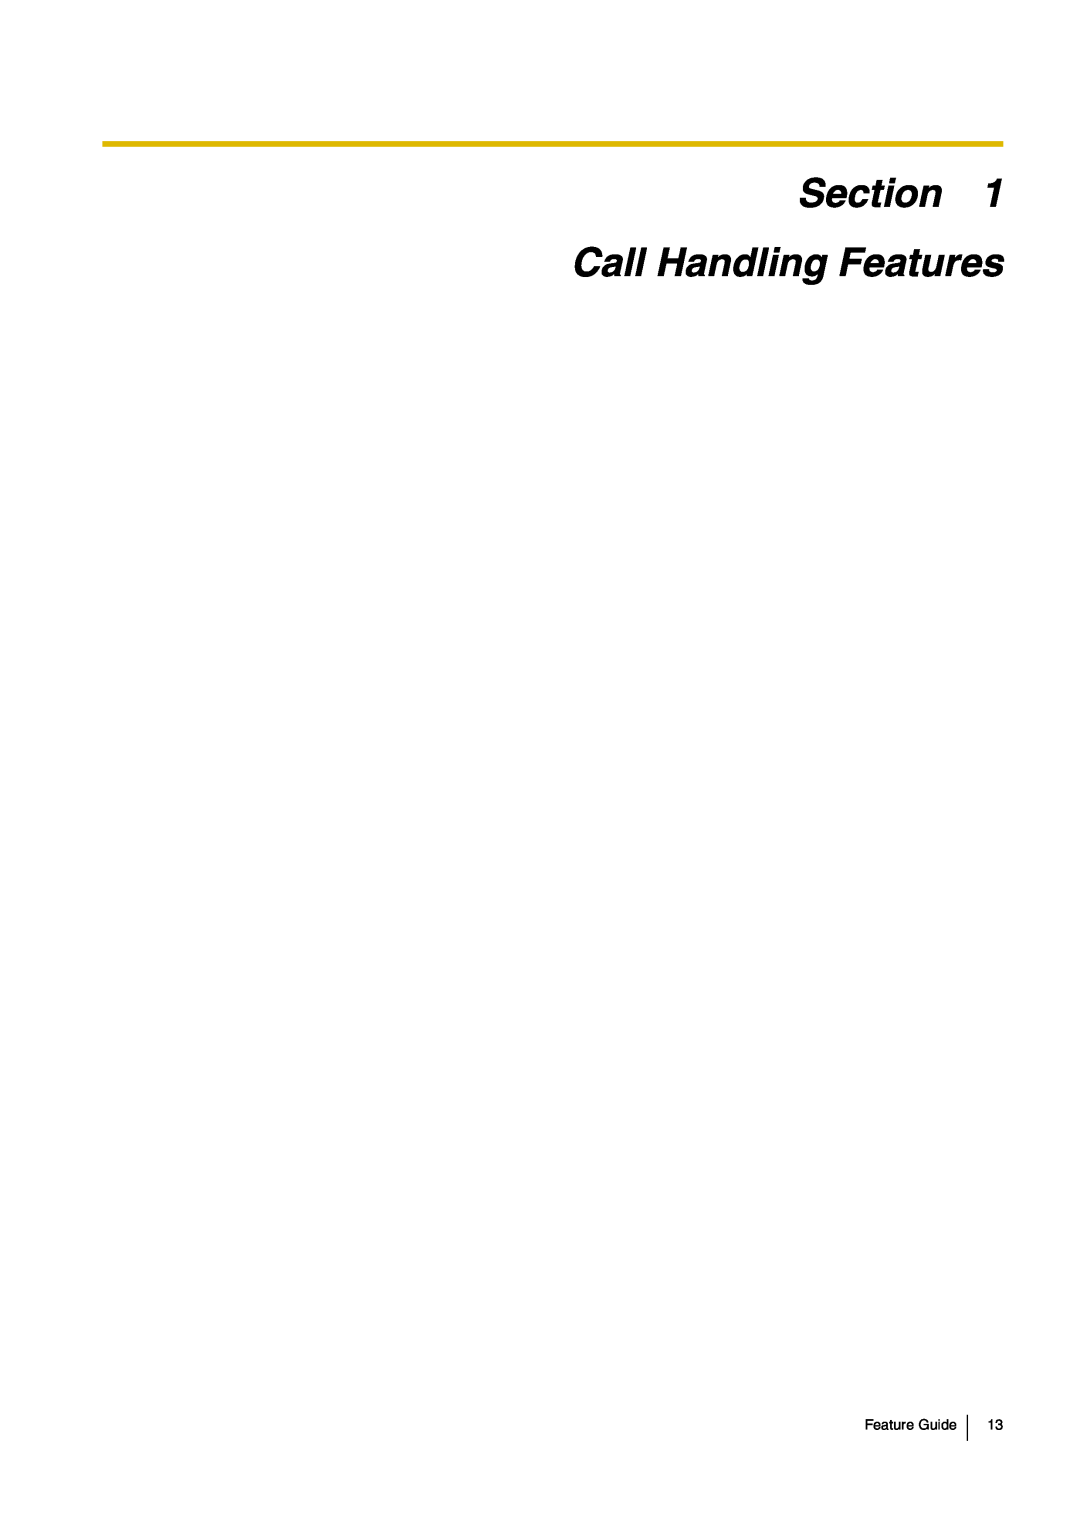 Panasonic kx-tea308 manual Section Call Handling Features, Feature Guide 